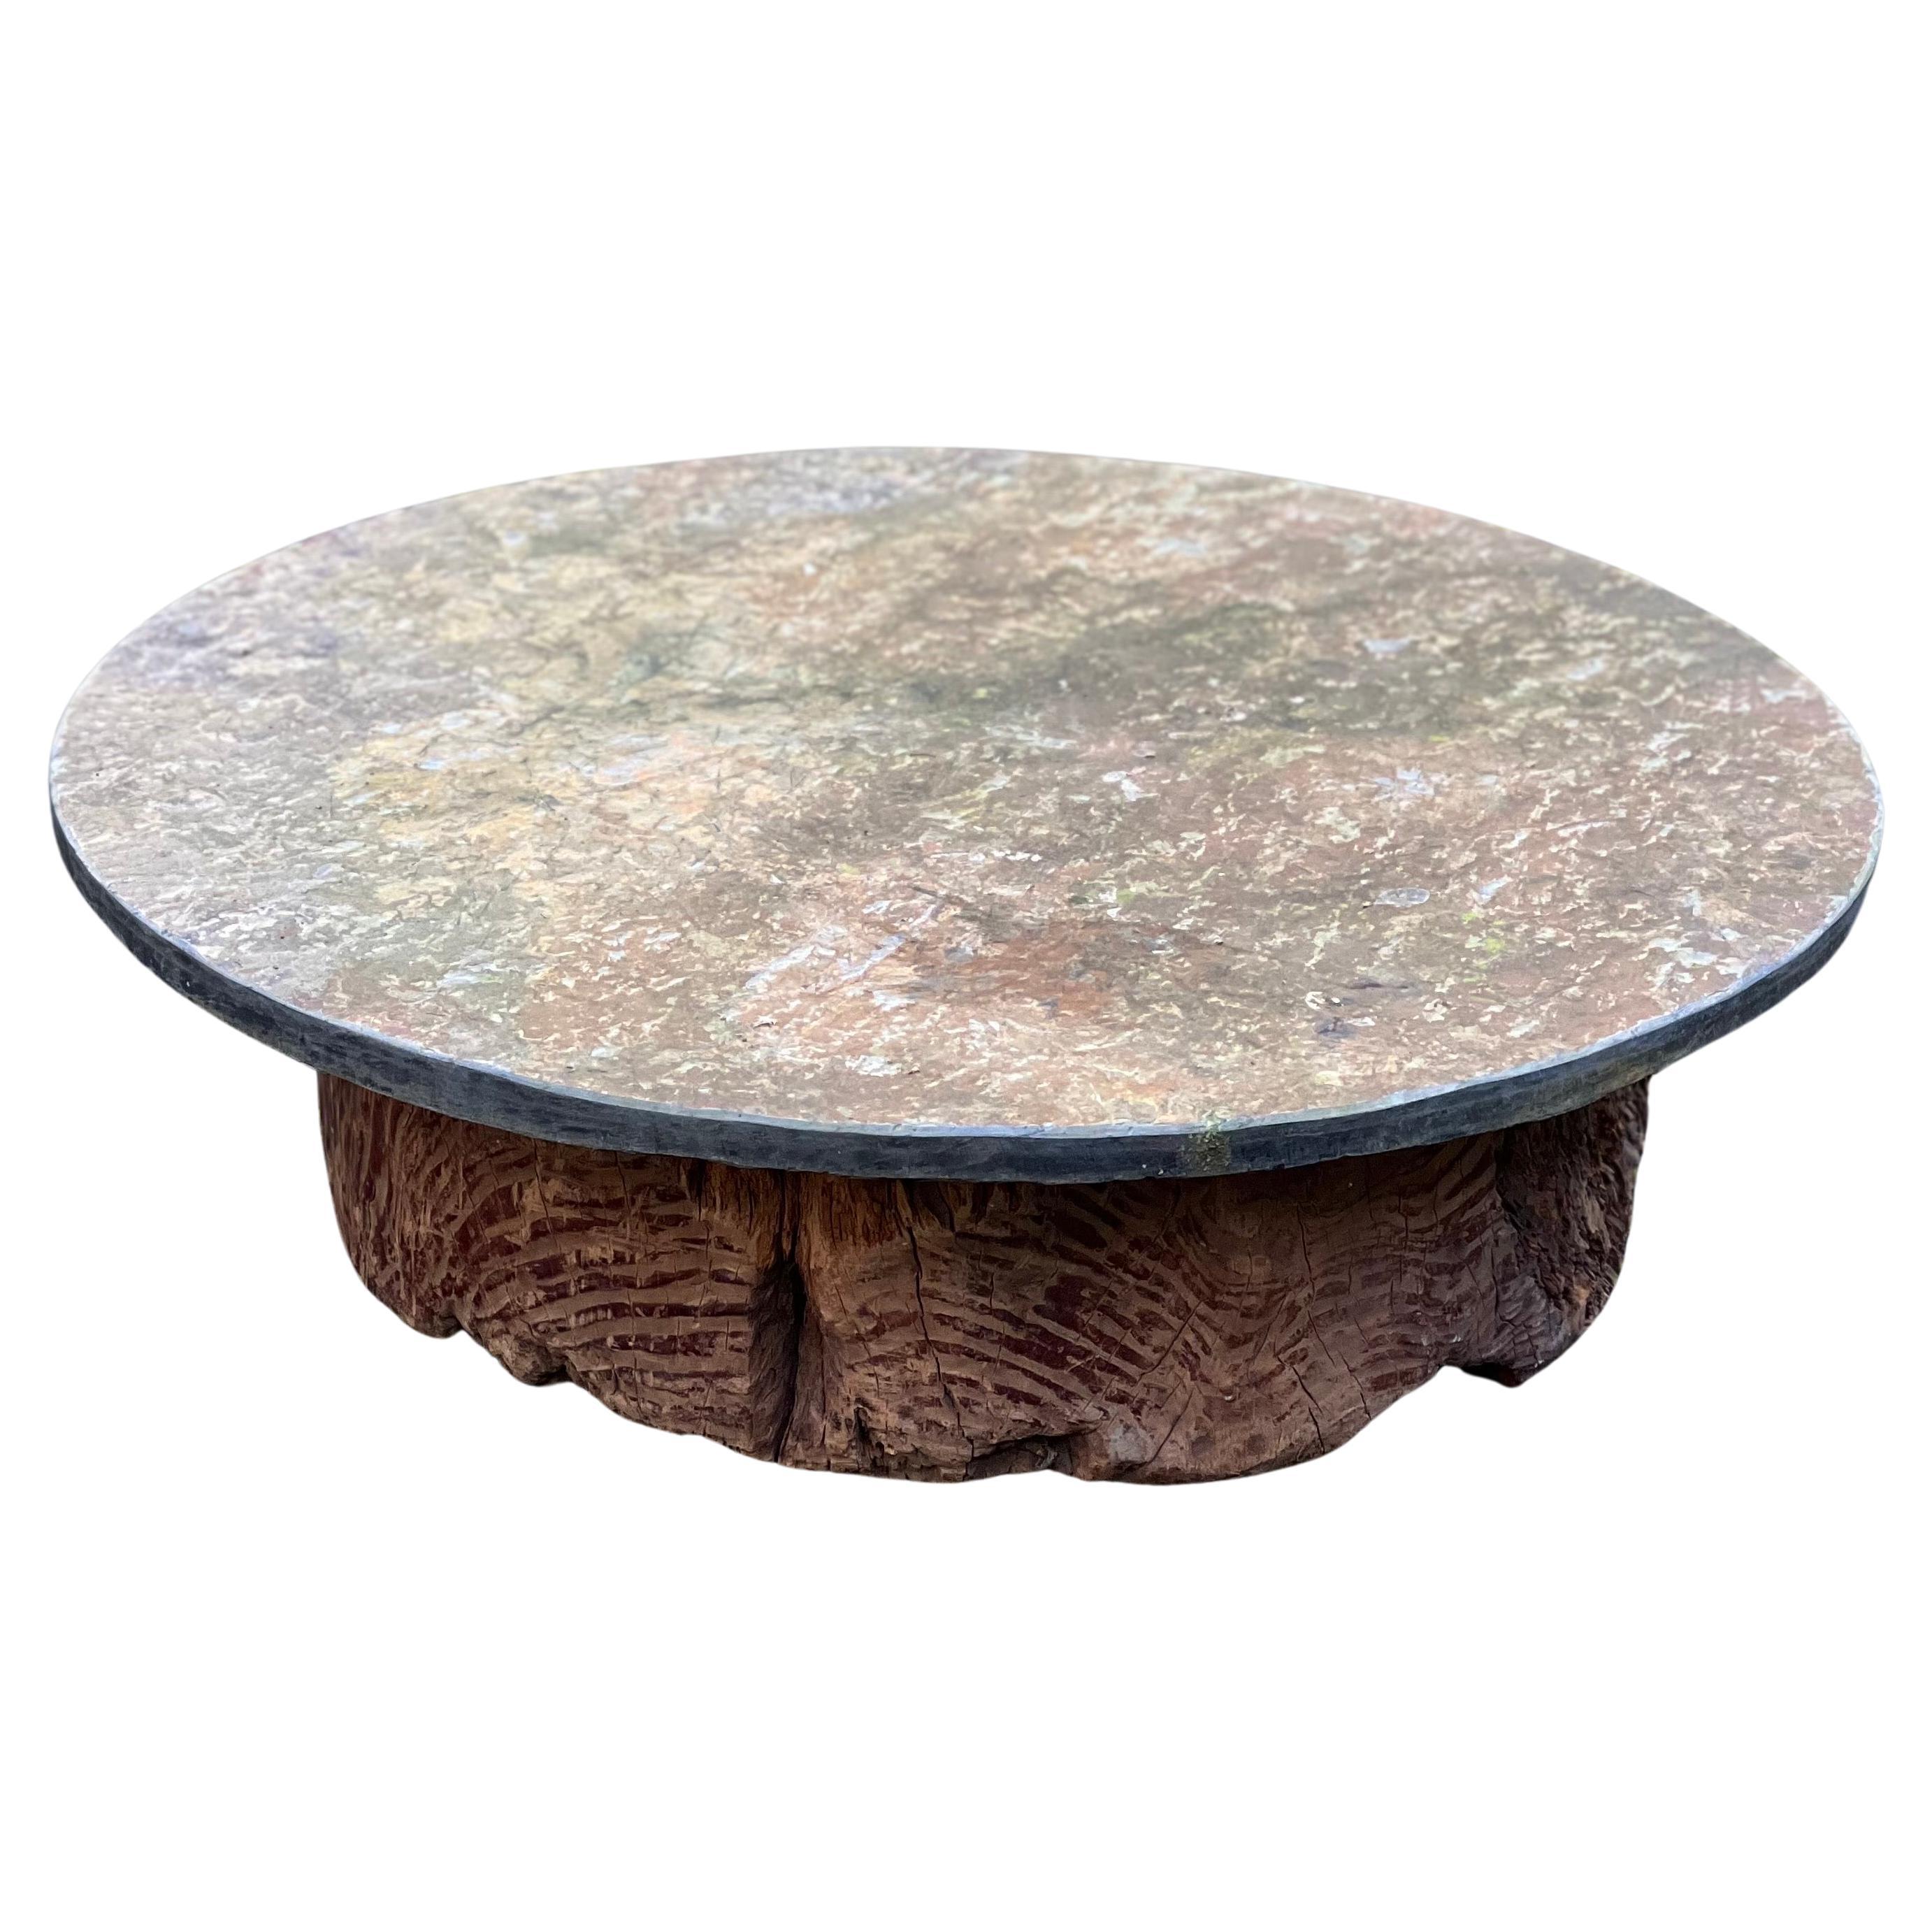 Majestic Schist Fossil Stone Coffee Table, antique Japanese wooden base. Unique. For Sale